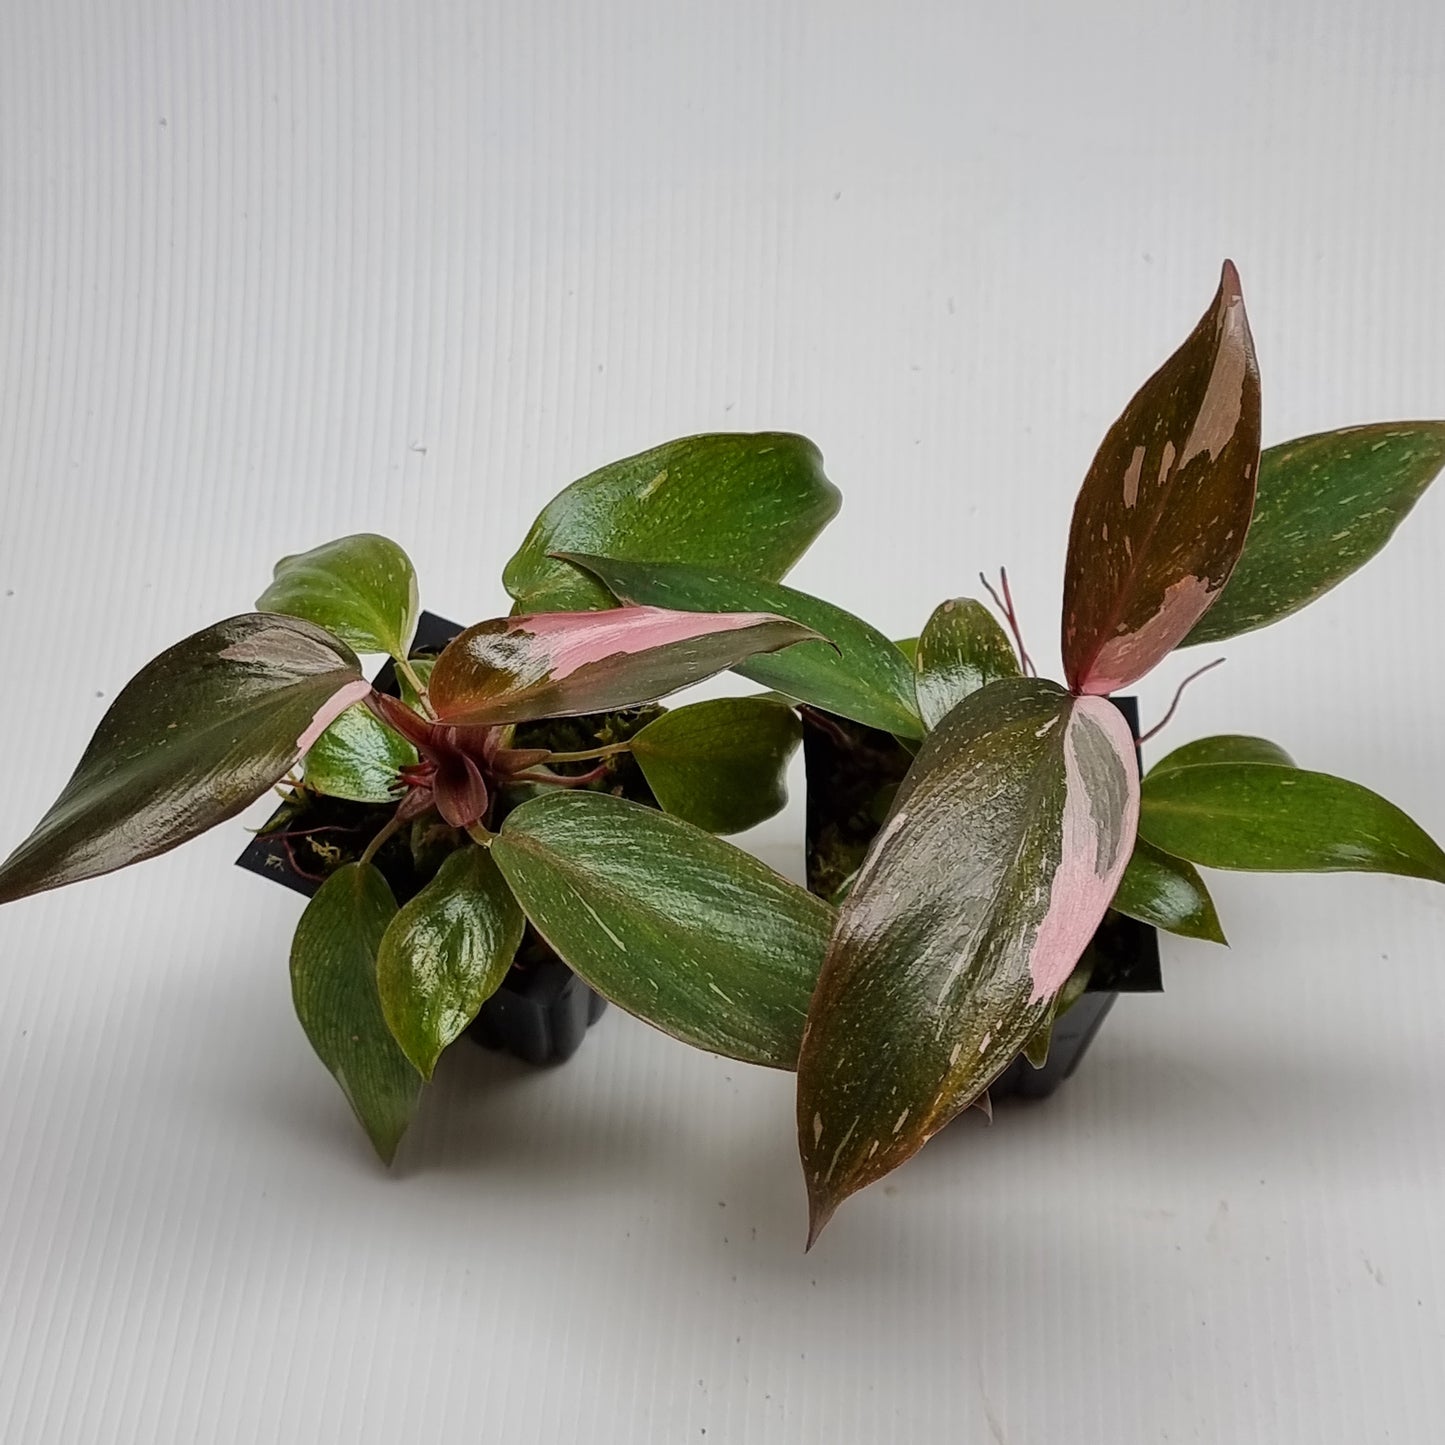 rare Philodendron pink princess marble for sale in Perth Australia